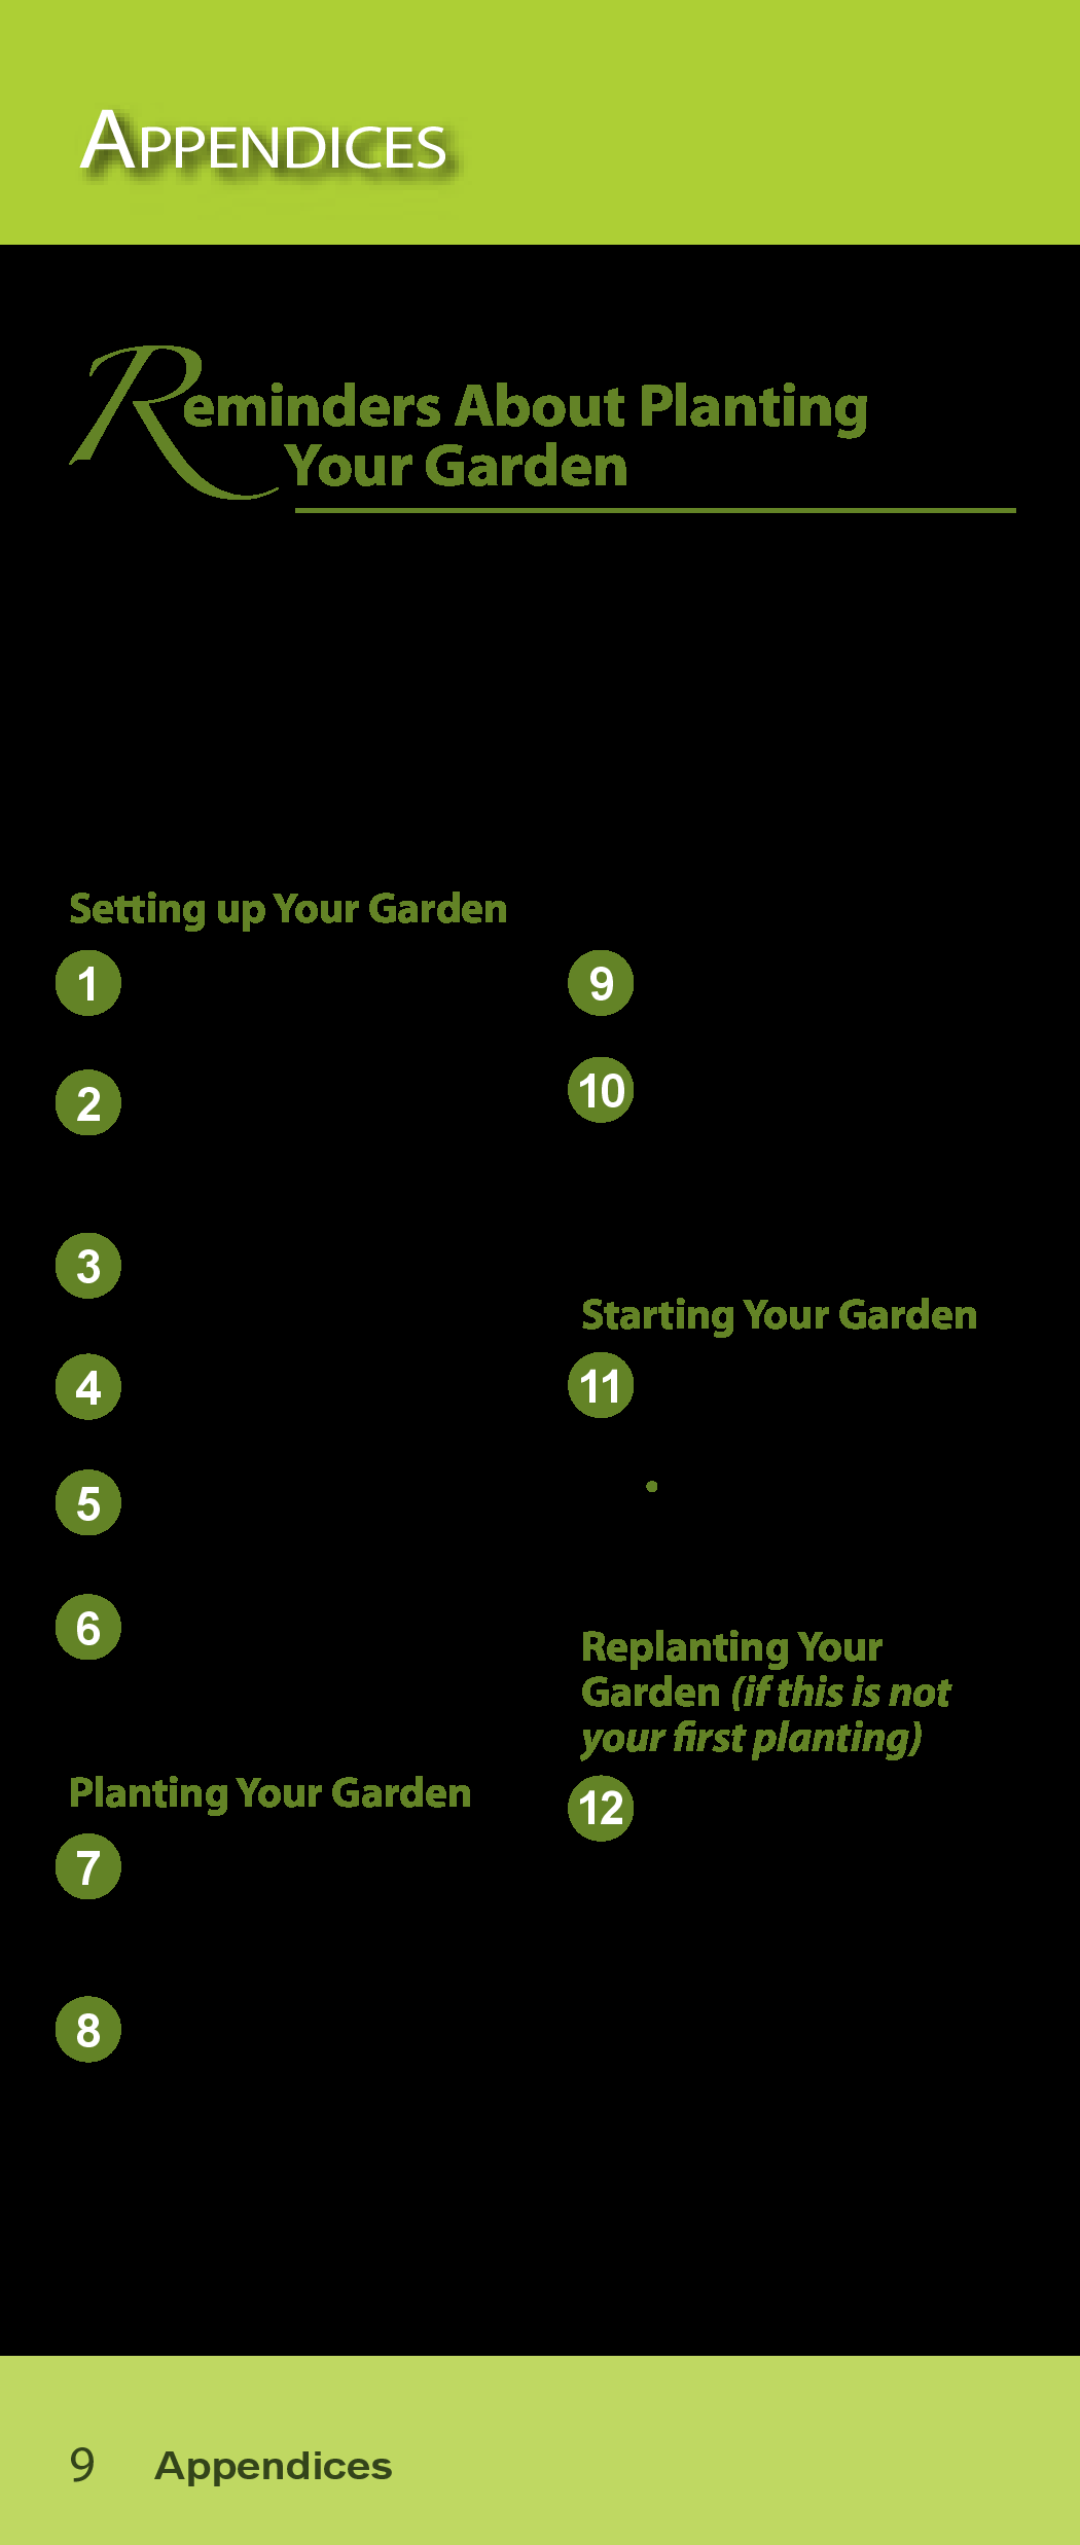 AeroGarden Salad Series Appendices, Reminders About Planting Your Garden, Setting up Your Garden, Starting Your Garden 